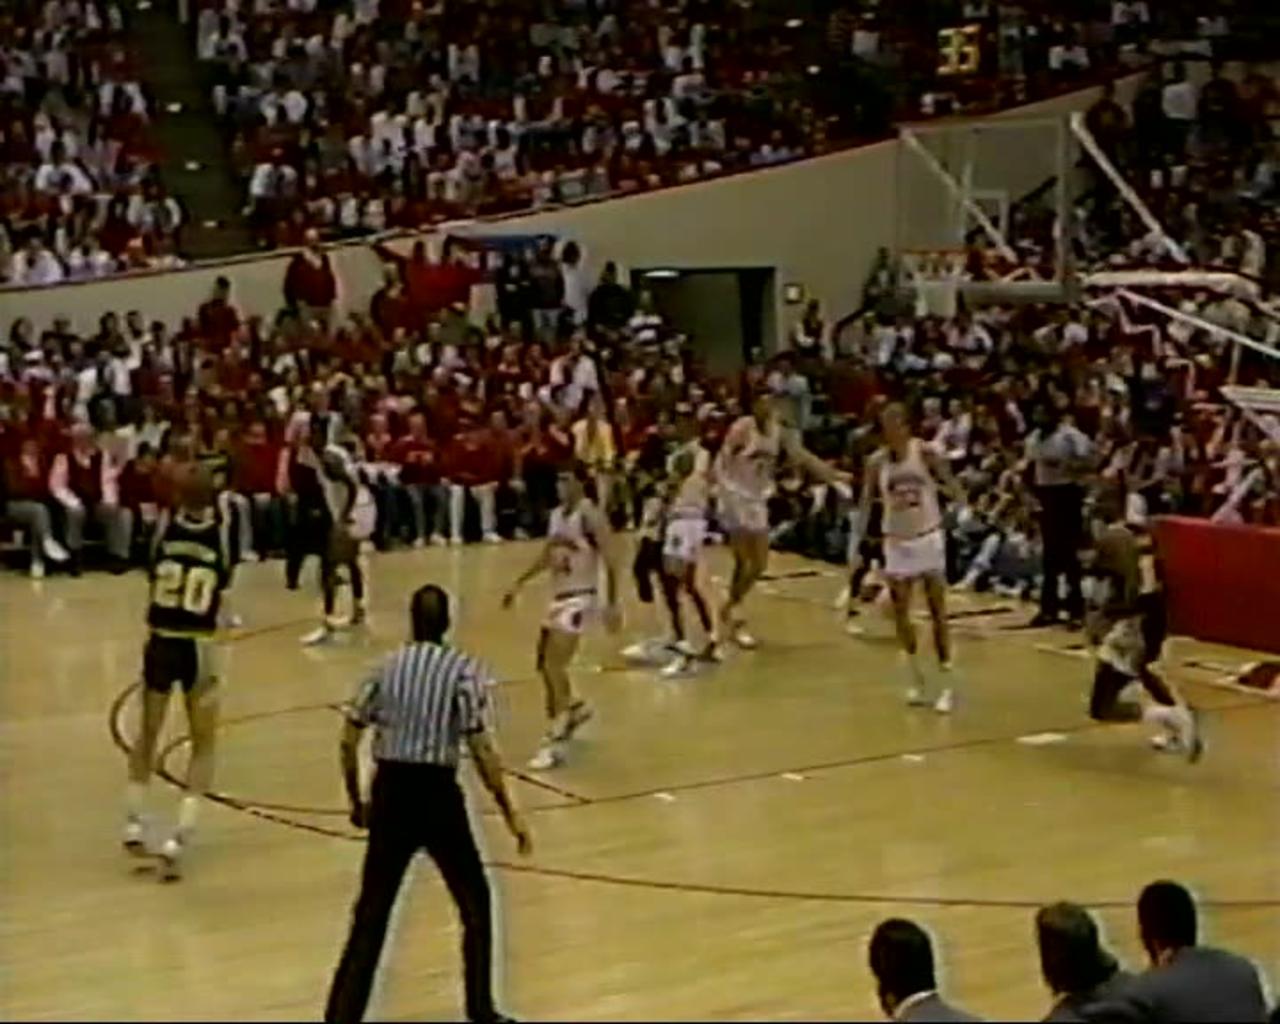 February 19, 1989 - College Basketball: Michigan at Indiana (Joined in Progress)